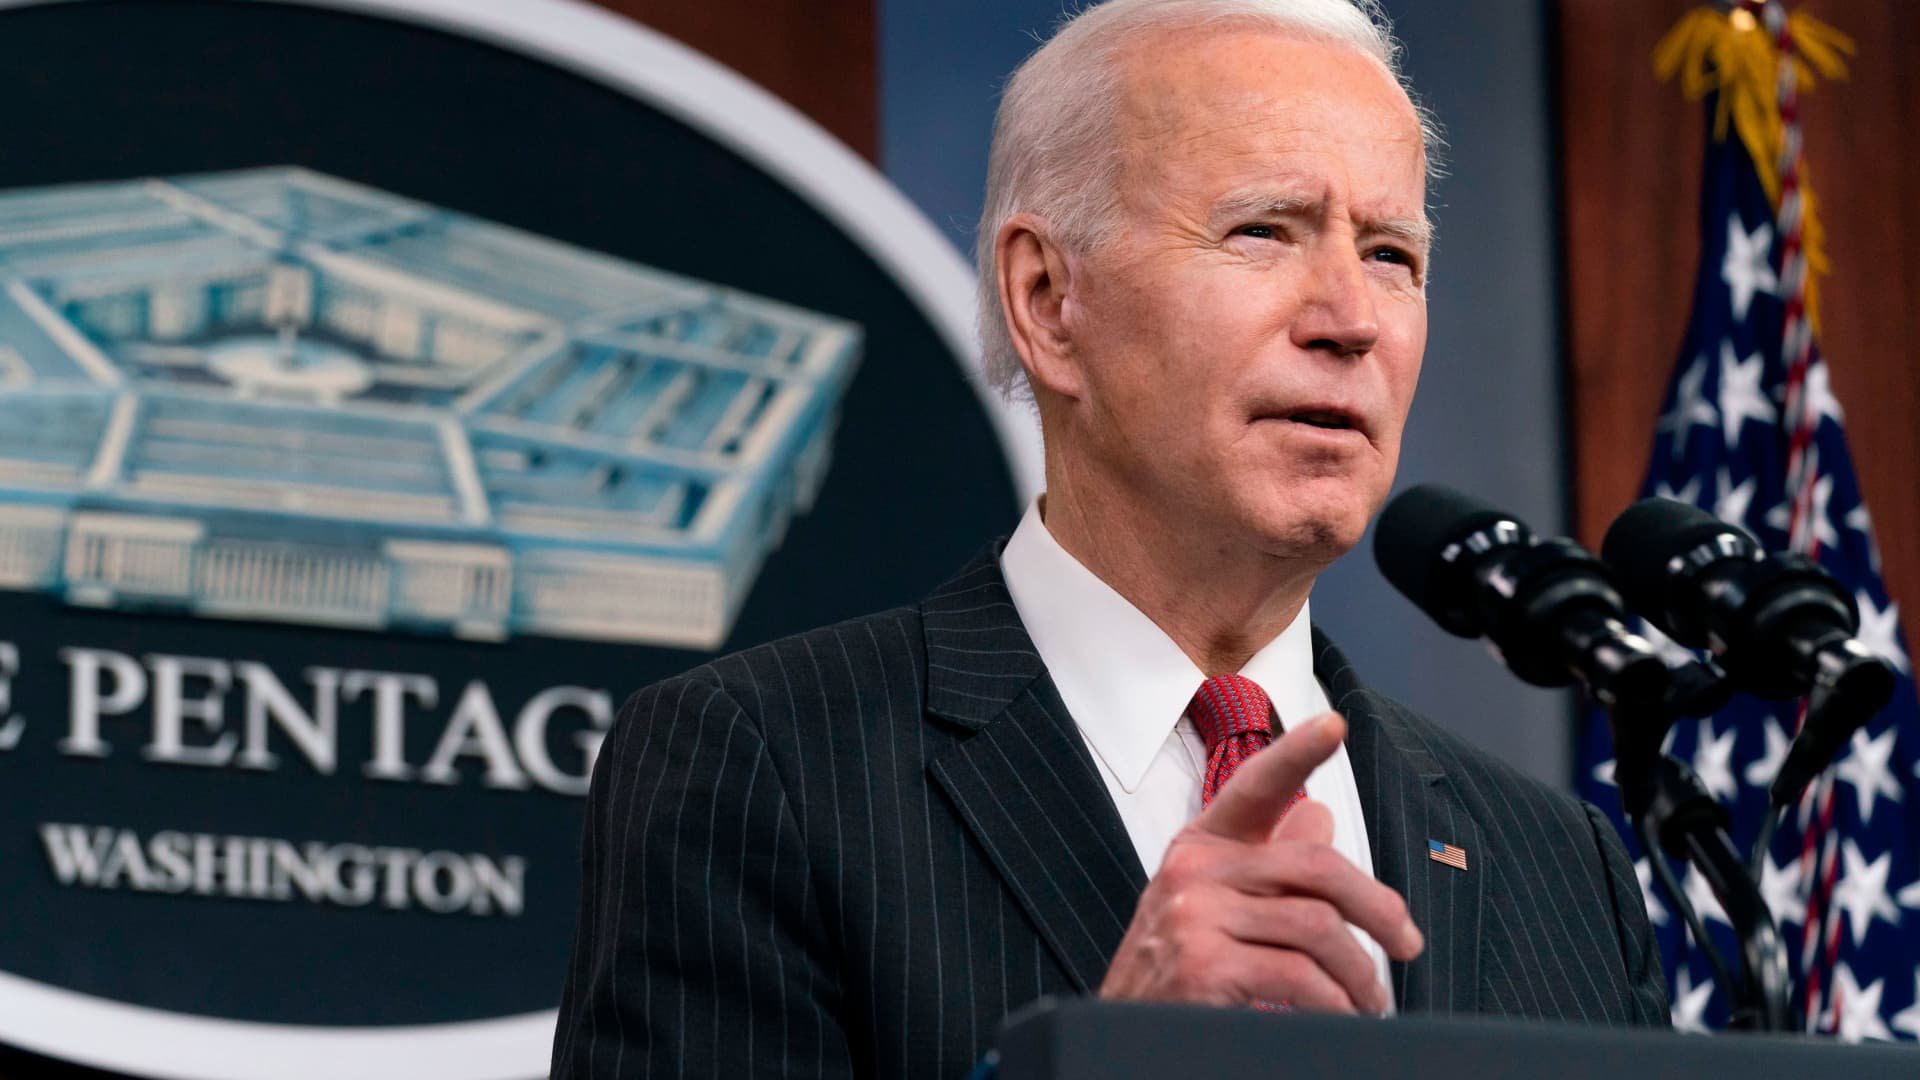 Biden signs executive order to address chip shortage through a review to strengthen supply chains